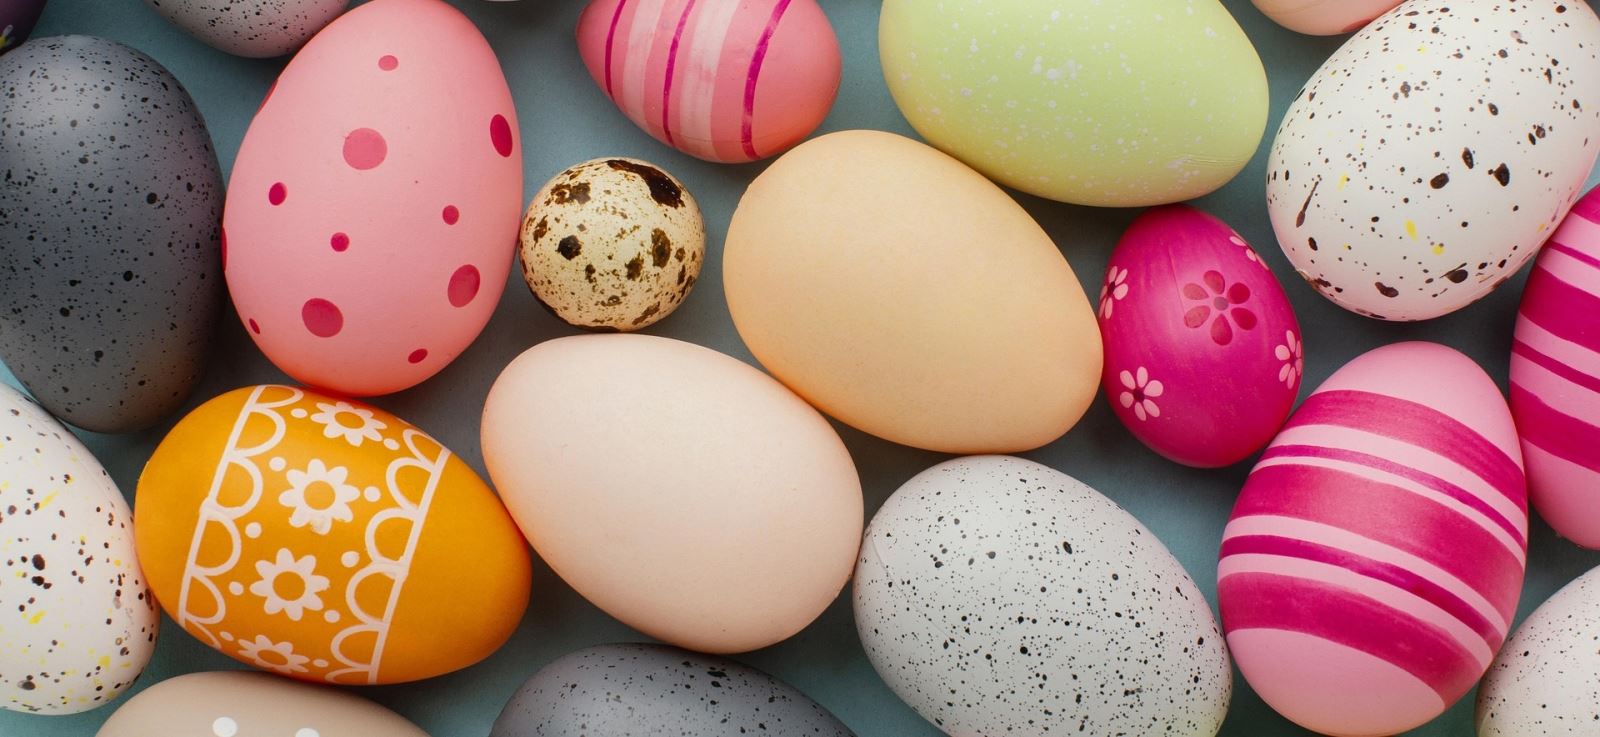 Photograph of painted Easter eggs